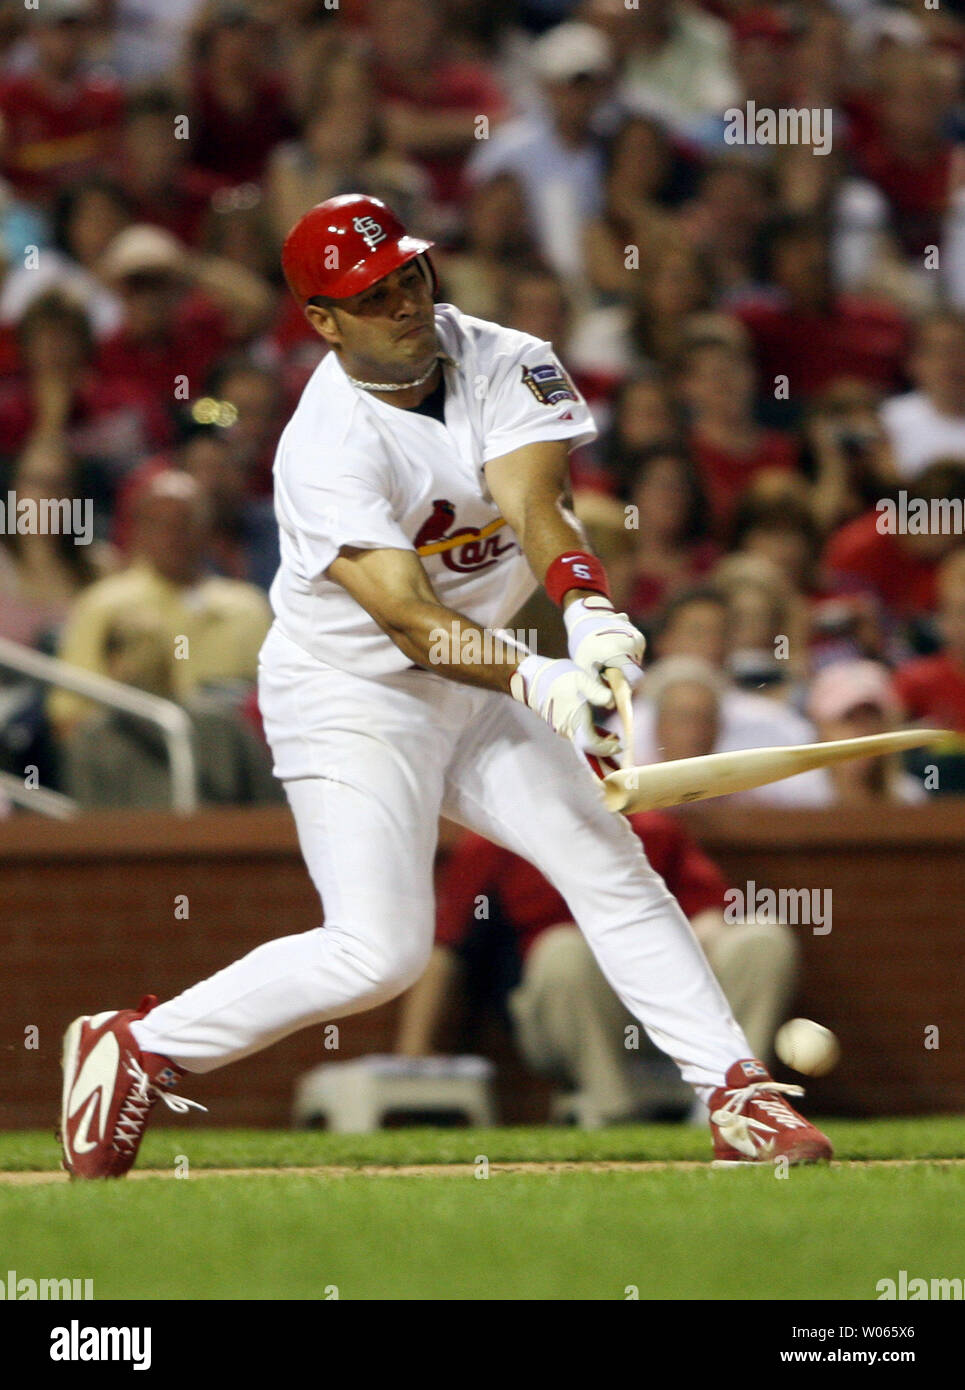 St. Louis Cardinals Albert Pujols breaks his bat as he grounds out in the  sixth inning against the Cincinnati Reds at Busch Stadium in St. Louis on  April 14, 2006. (UPI Photo/Bill